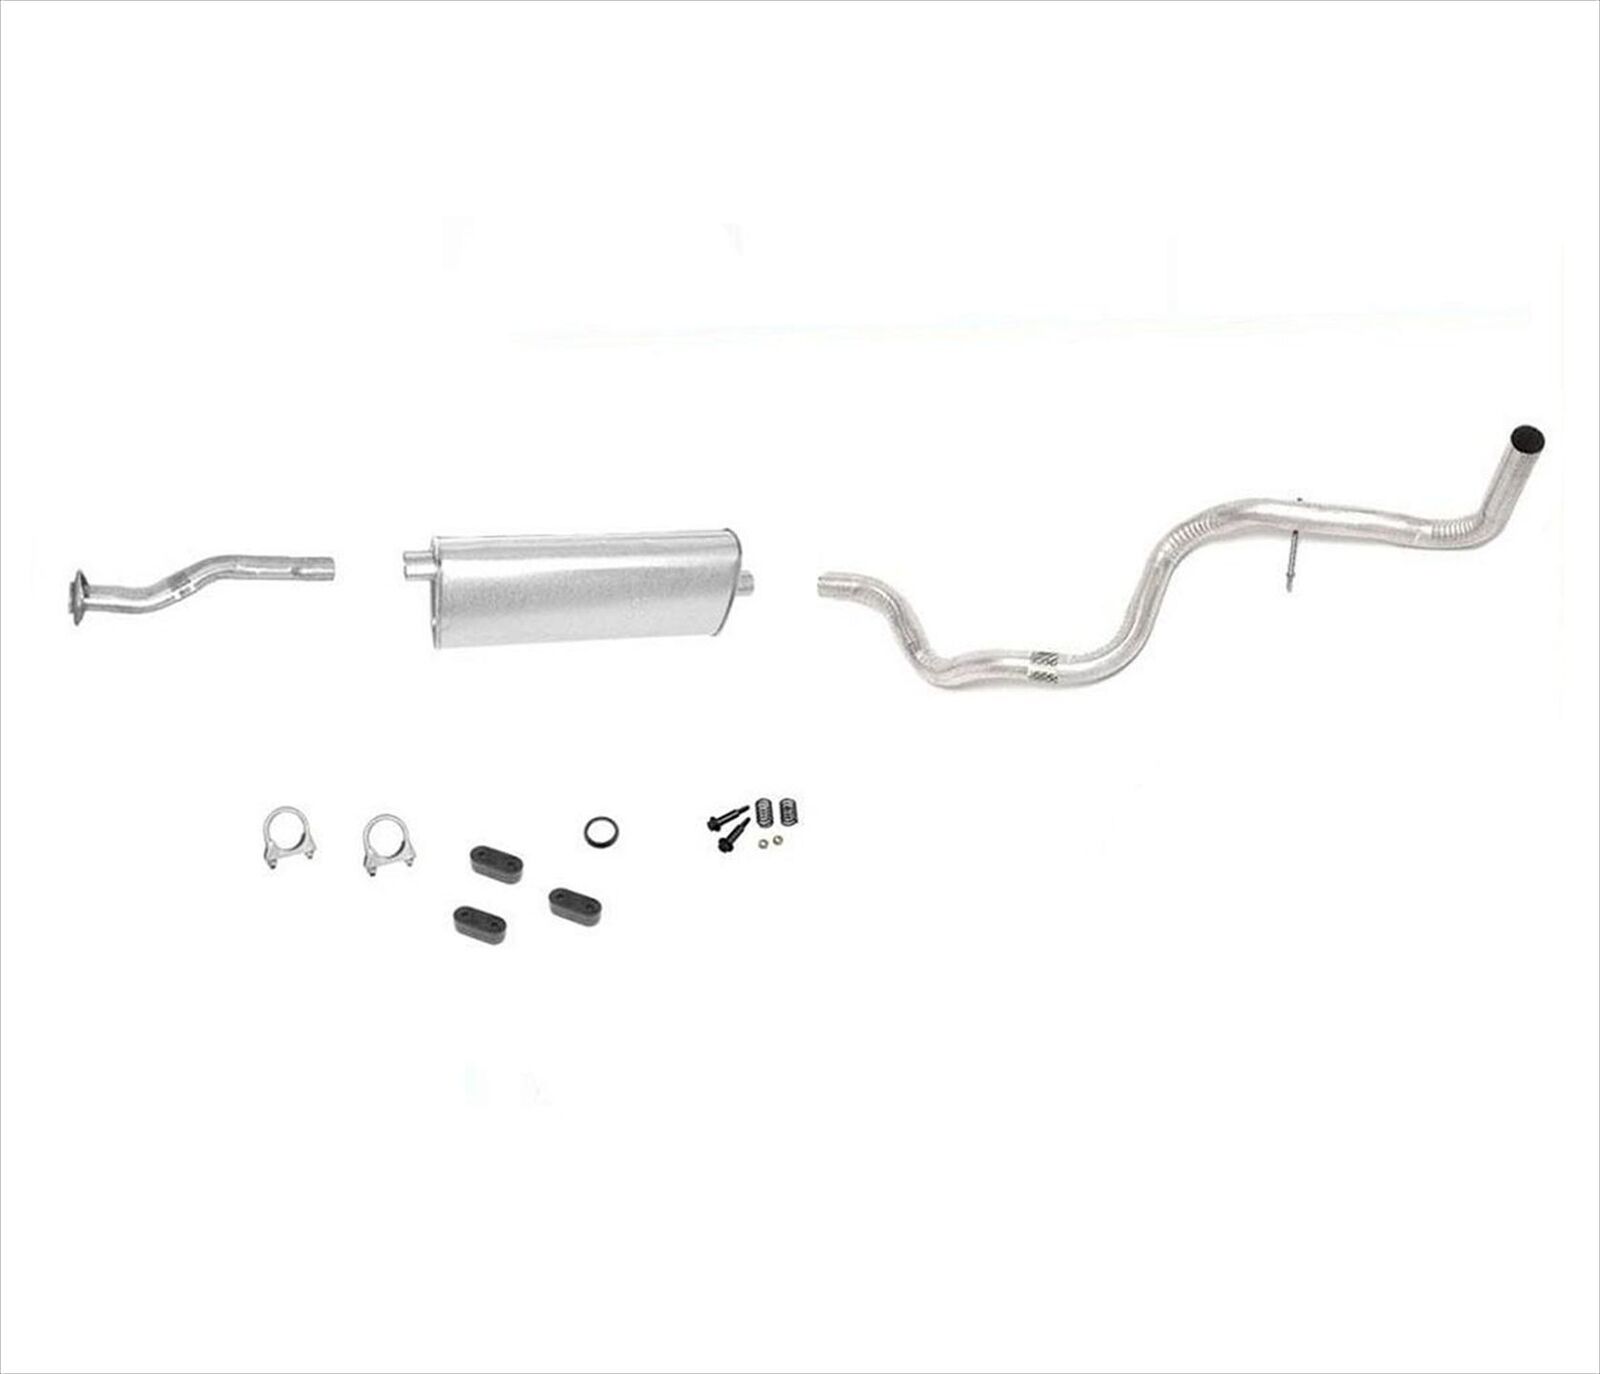 Fits For 98-01 Ranger 2.5L Only With 118 Inch Wheel Base Muffler Exhaust System